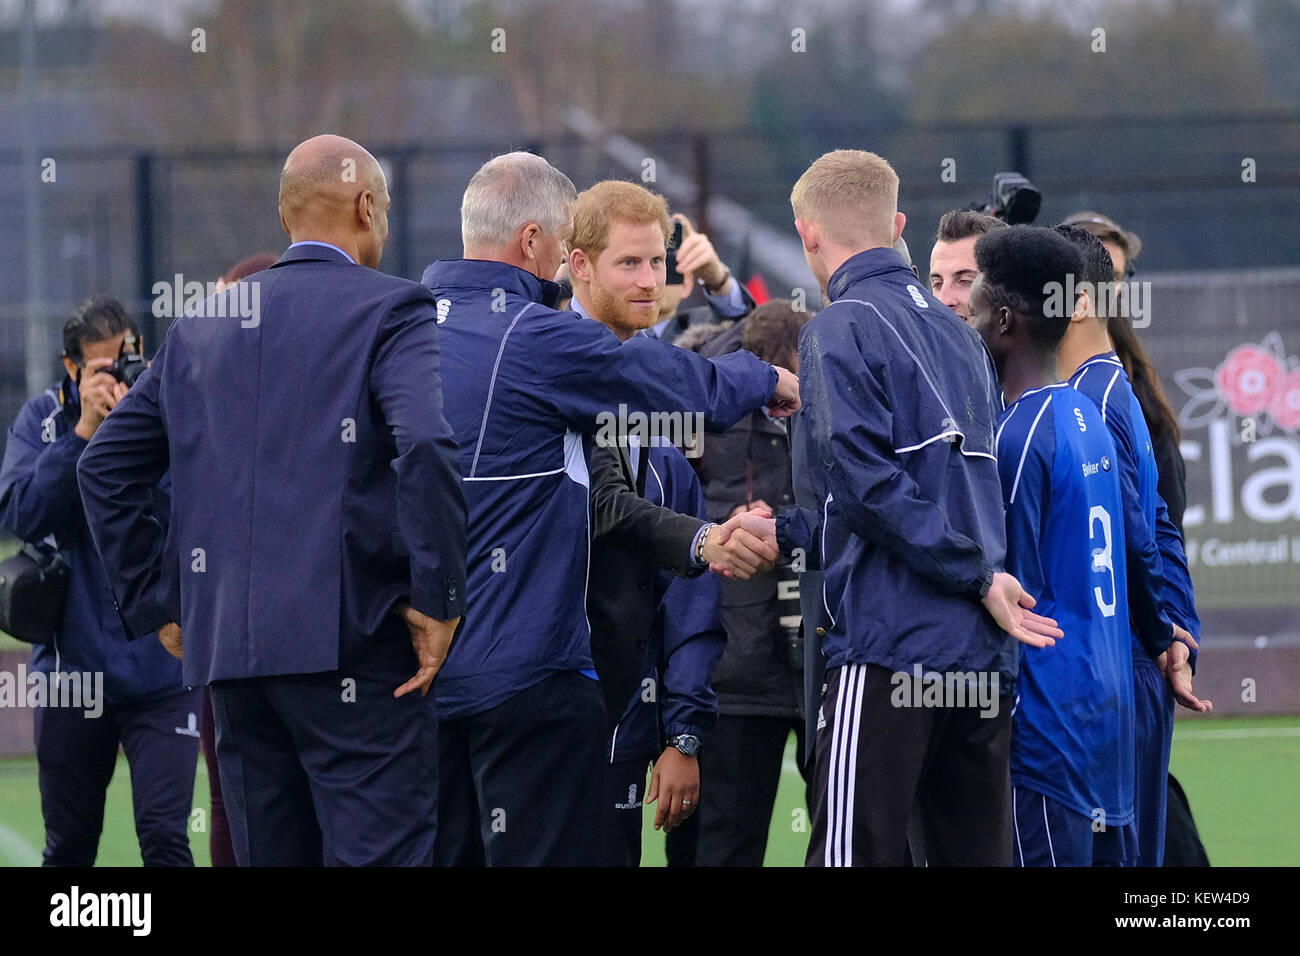 Preston, UK. 23rd Oct, 2017. Prince Harry visited the University of Central Lancashire's (UCLan) Sports Arena where he saw the Sir Tom Finney Soccer Development Centre and the Lancashire Bombers Wheelchair Basketball Club - two community organisations using the power of sport as a means for social development and inclusion. During the visit, His Royal Highness will meet a diverse group of people of all ages and abilities who participate in training sessions and local leagues together, with a view to building new and unique friendships. Credit: Paul Melling/Alamy Live News Stock Photo